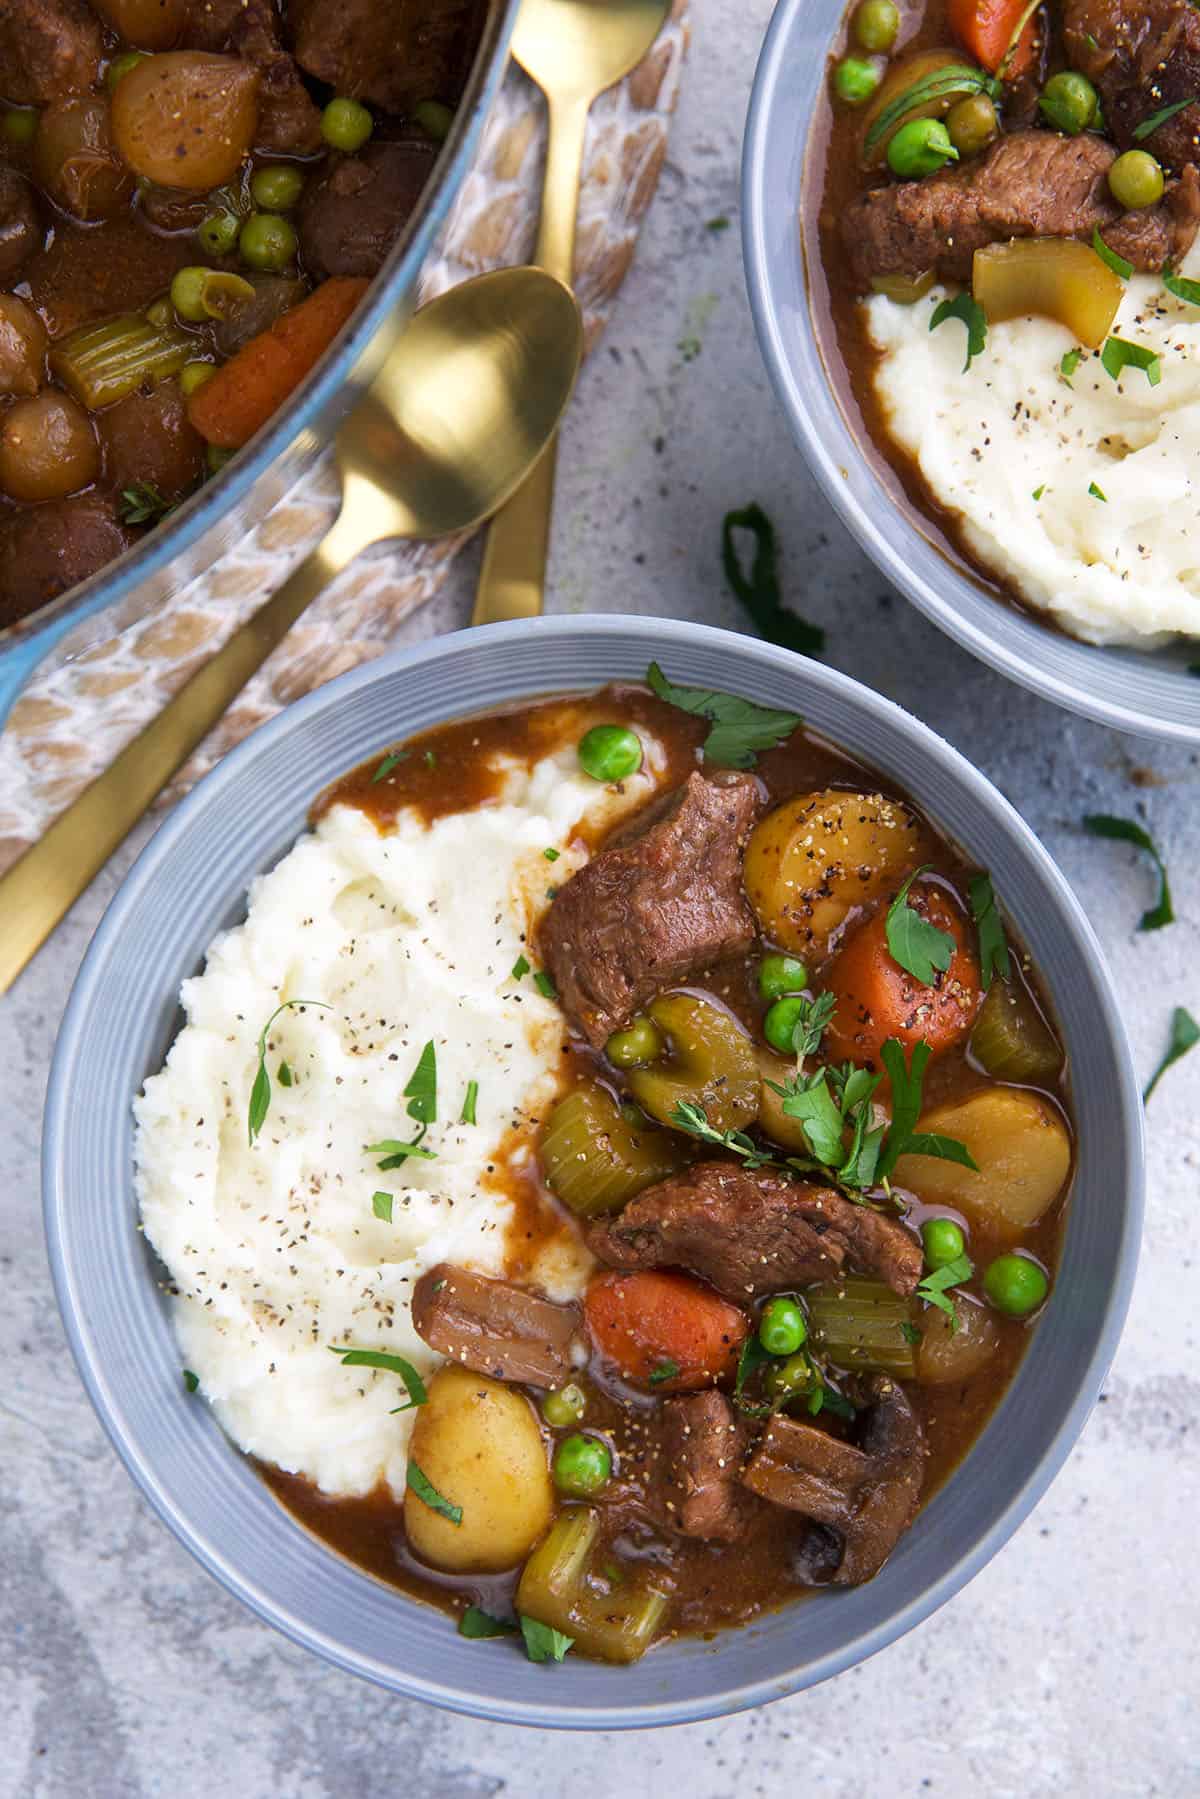 Beef stew is placed in a blue bowl with mashed potatoes. 